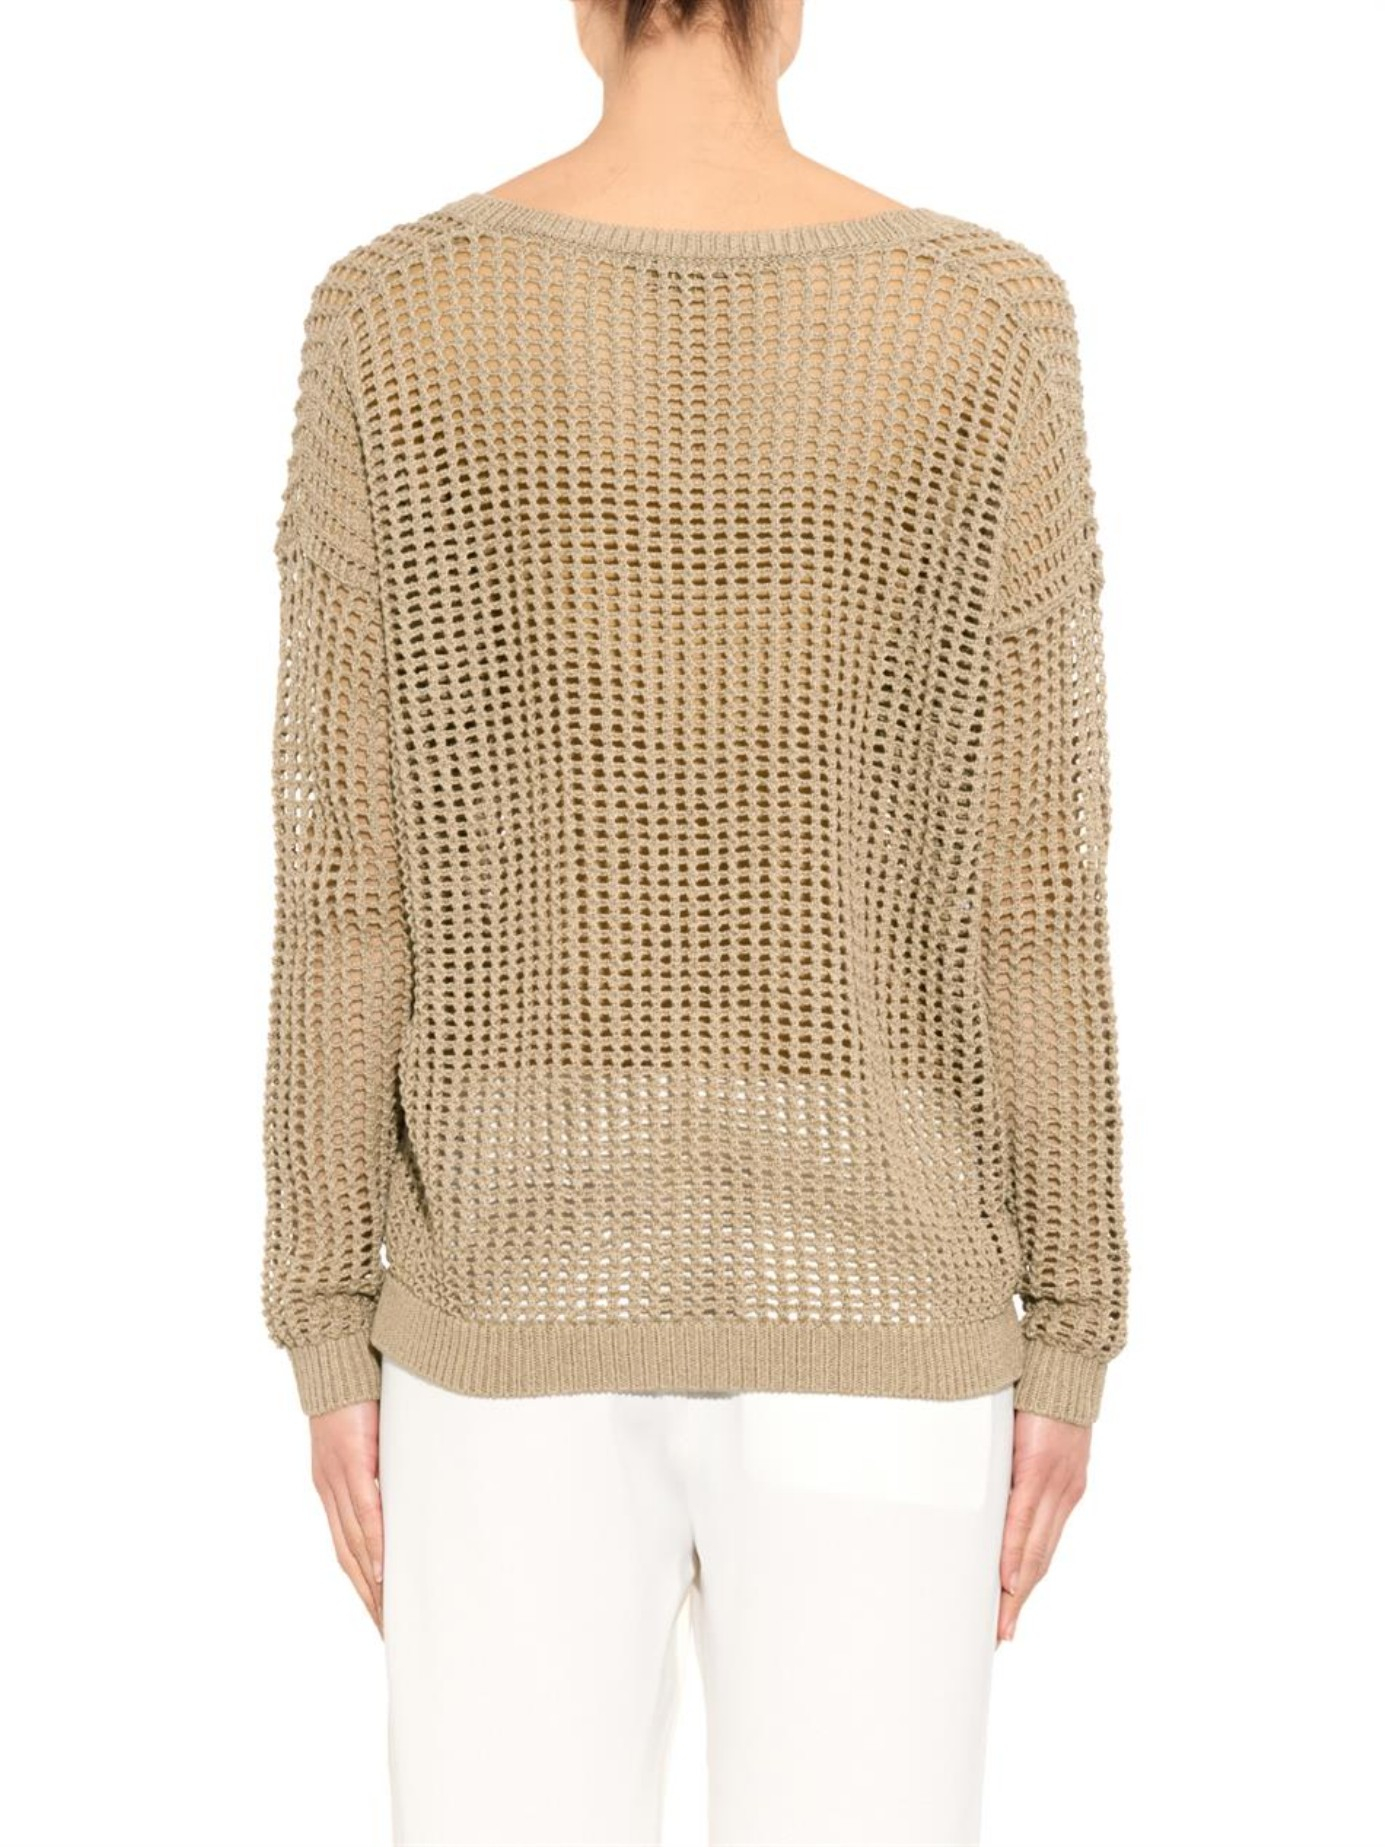 Vince Grid Mesh Open-knit Cotton Sweater in Beige (Natural) - Lyst